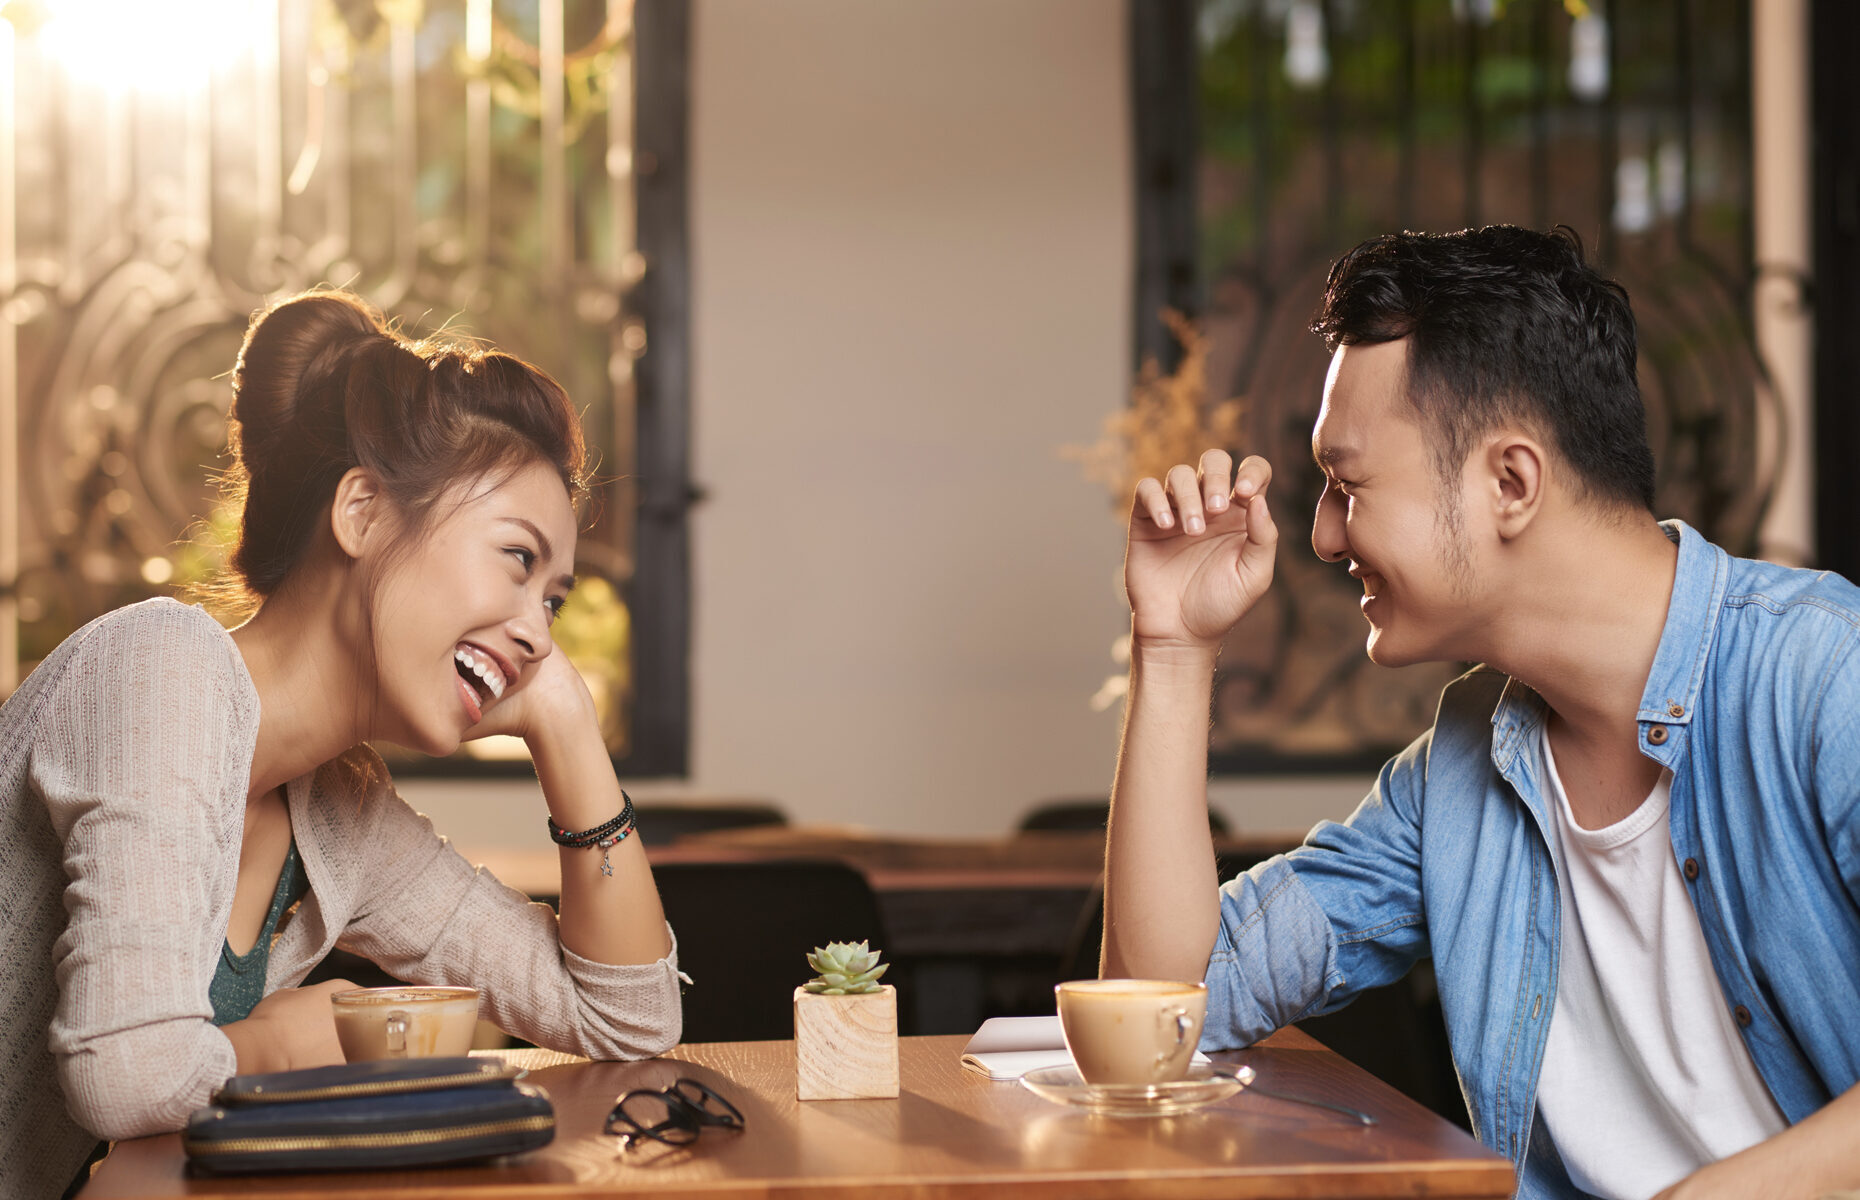 <p>Most people want to share a common interest or two with their partner, which can often lead to little fibs about actually liking the same thing. Don’t worry, <a href="https://www.bustle.com/articles/191676-11-times-when-its-ok-to-tell-a-white-lie" rel="noreferrer noopener">science shows these well-meaning lies are OK</a>, so long as you’re not compromising your beliefs or values by doing something you don’t want to do.</p>